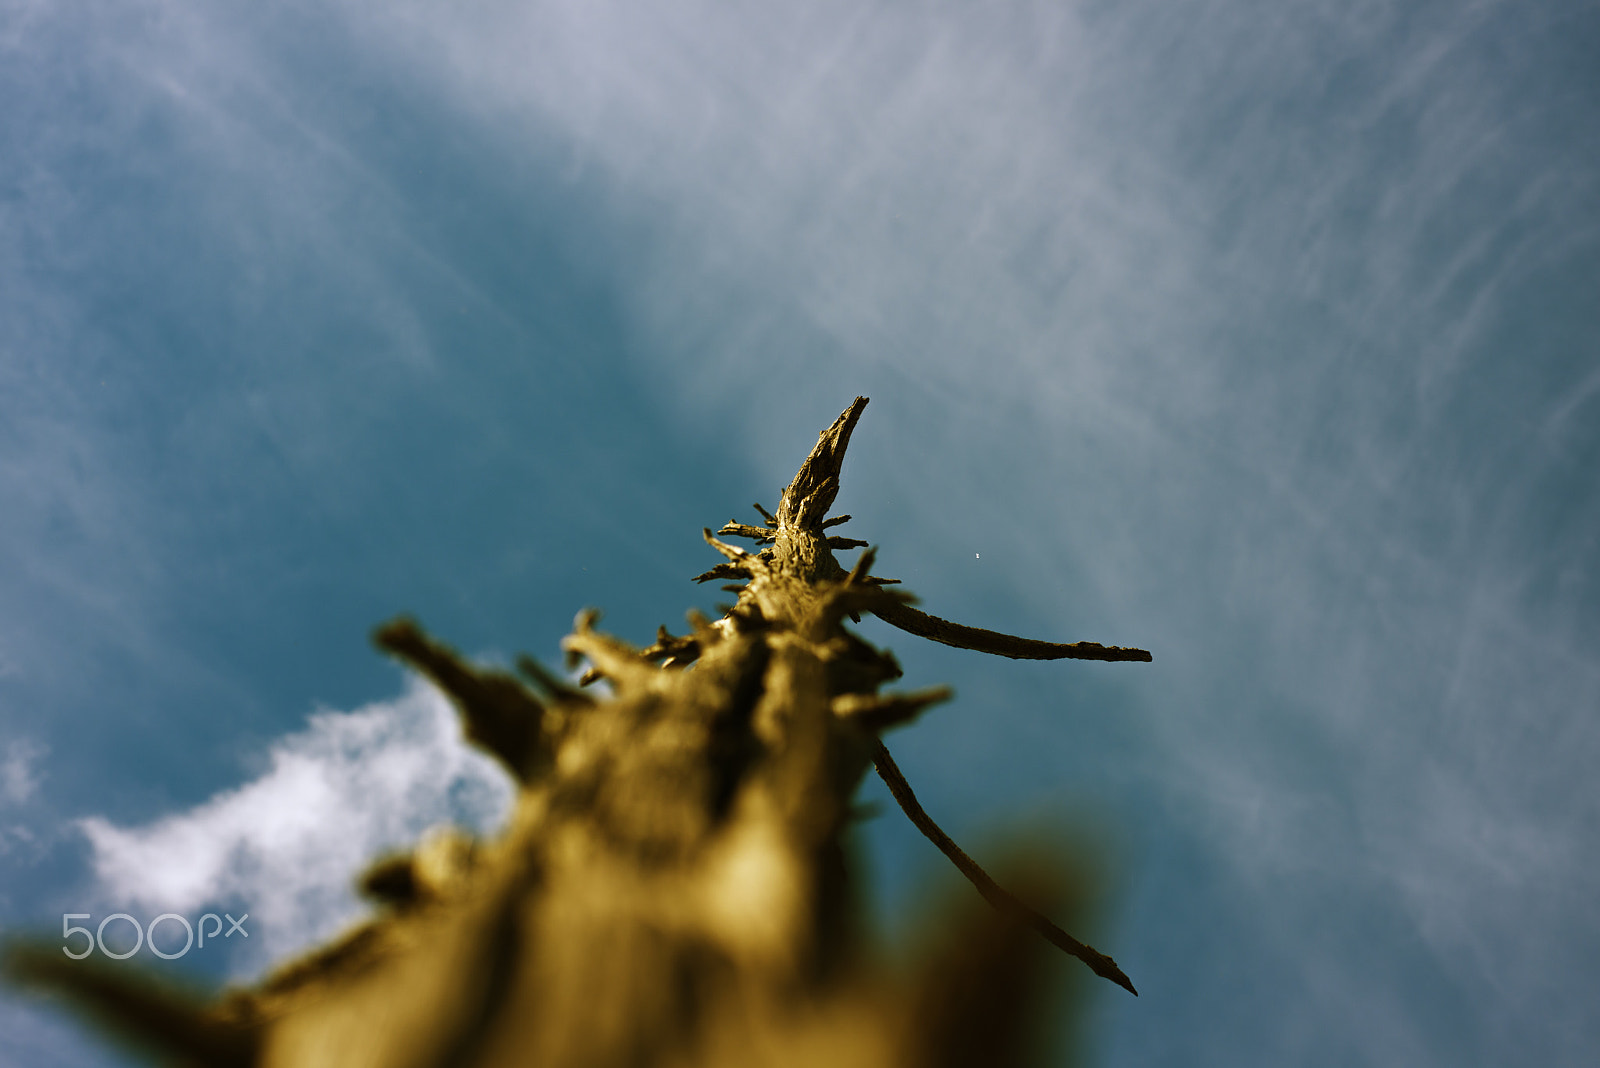 Nikon D800 sample photo. The old and completely dry tree growing against the blue sky photography